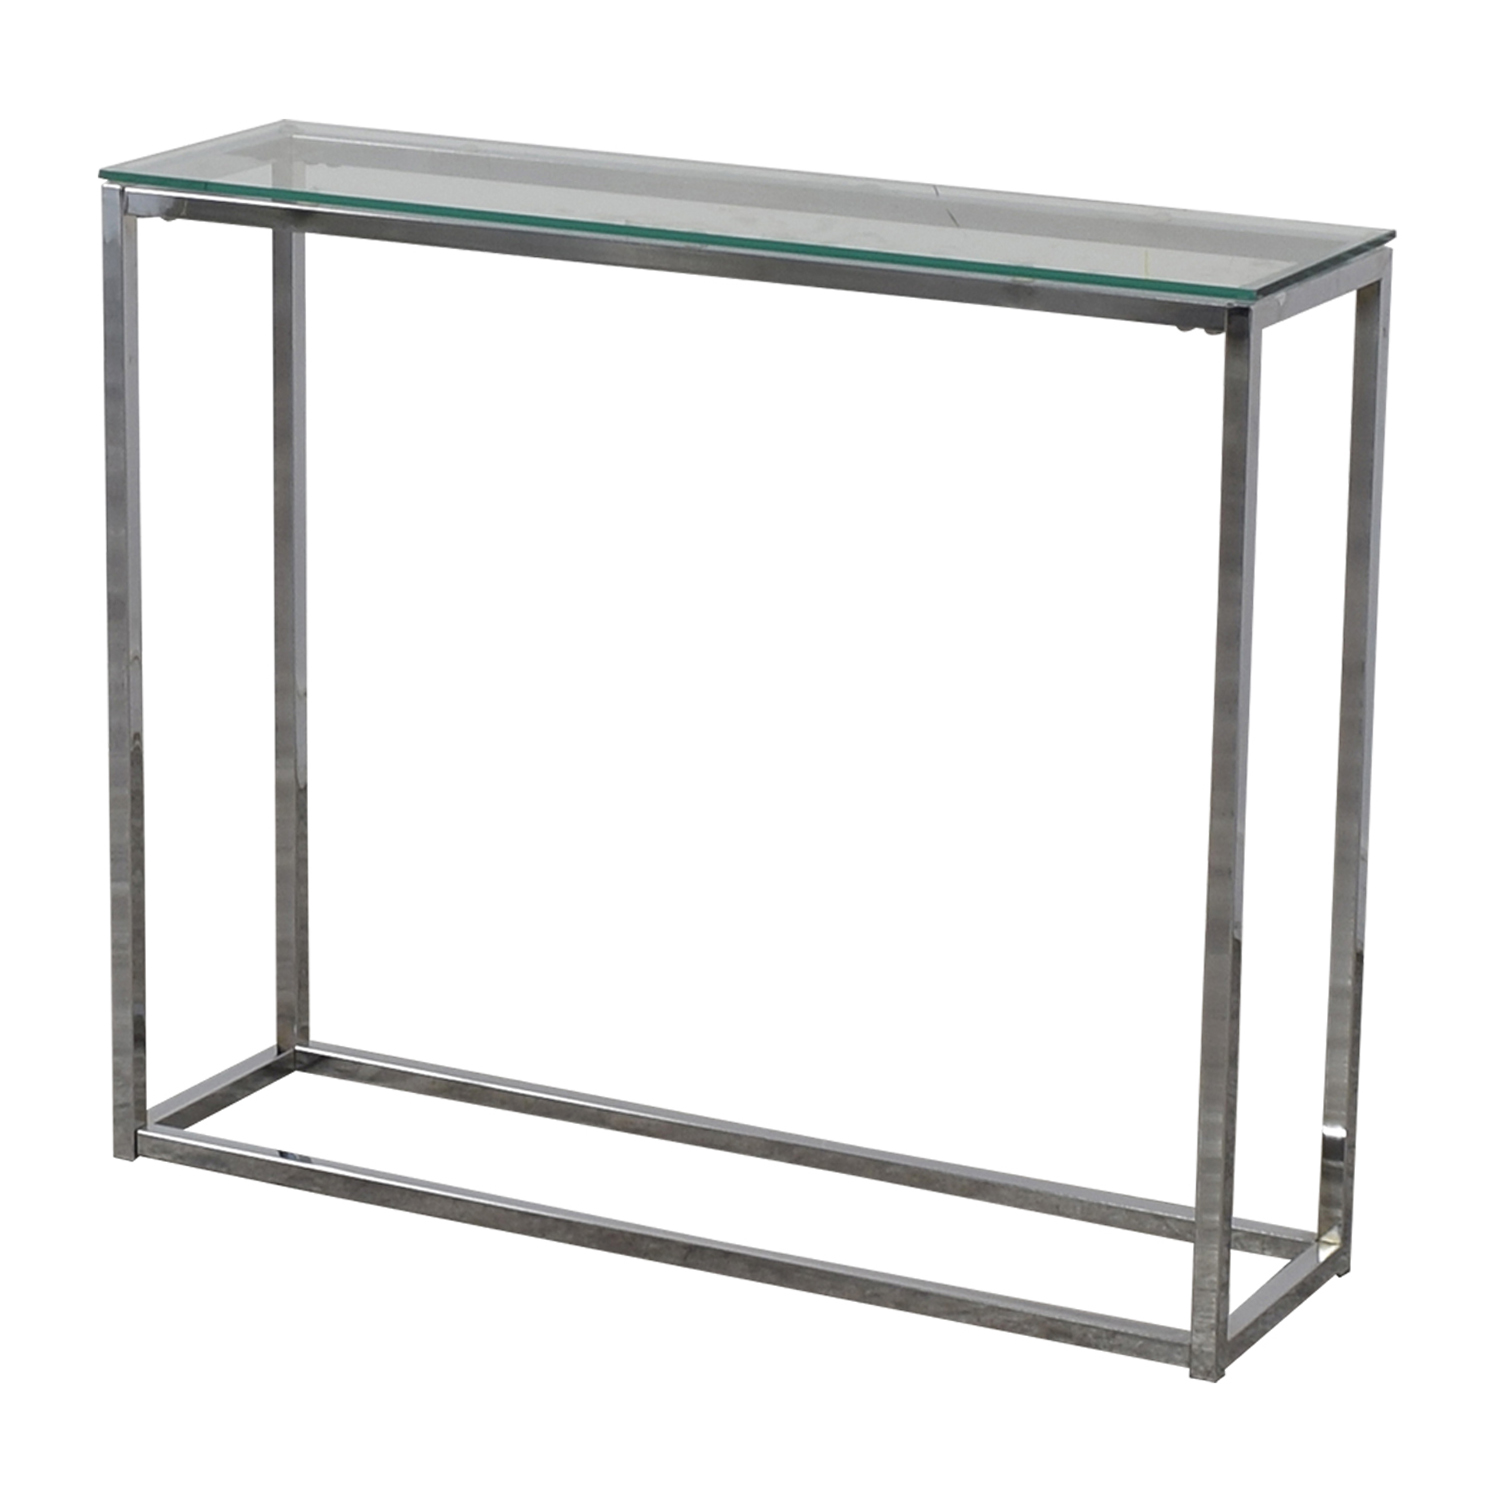 off glass and chrome console table tables used metal accent sofa with shelf nyc outdoor patio umbrella bar bunnings vintage make your own barn door ikea white storage box corner